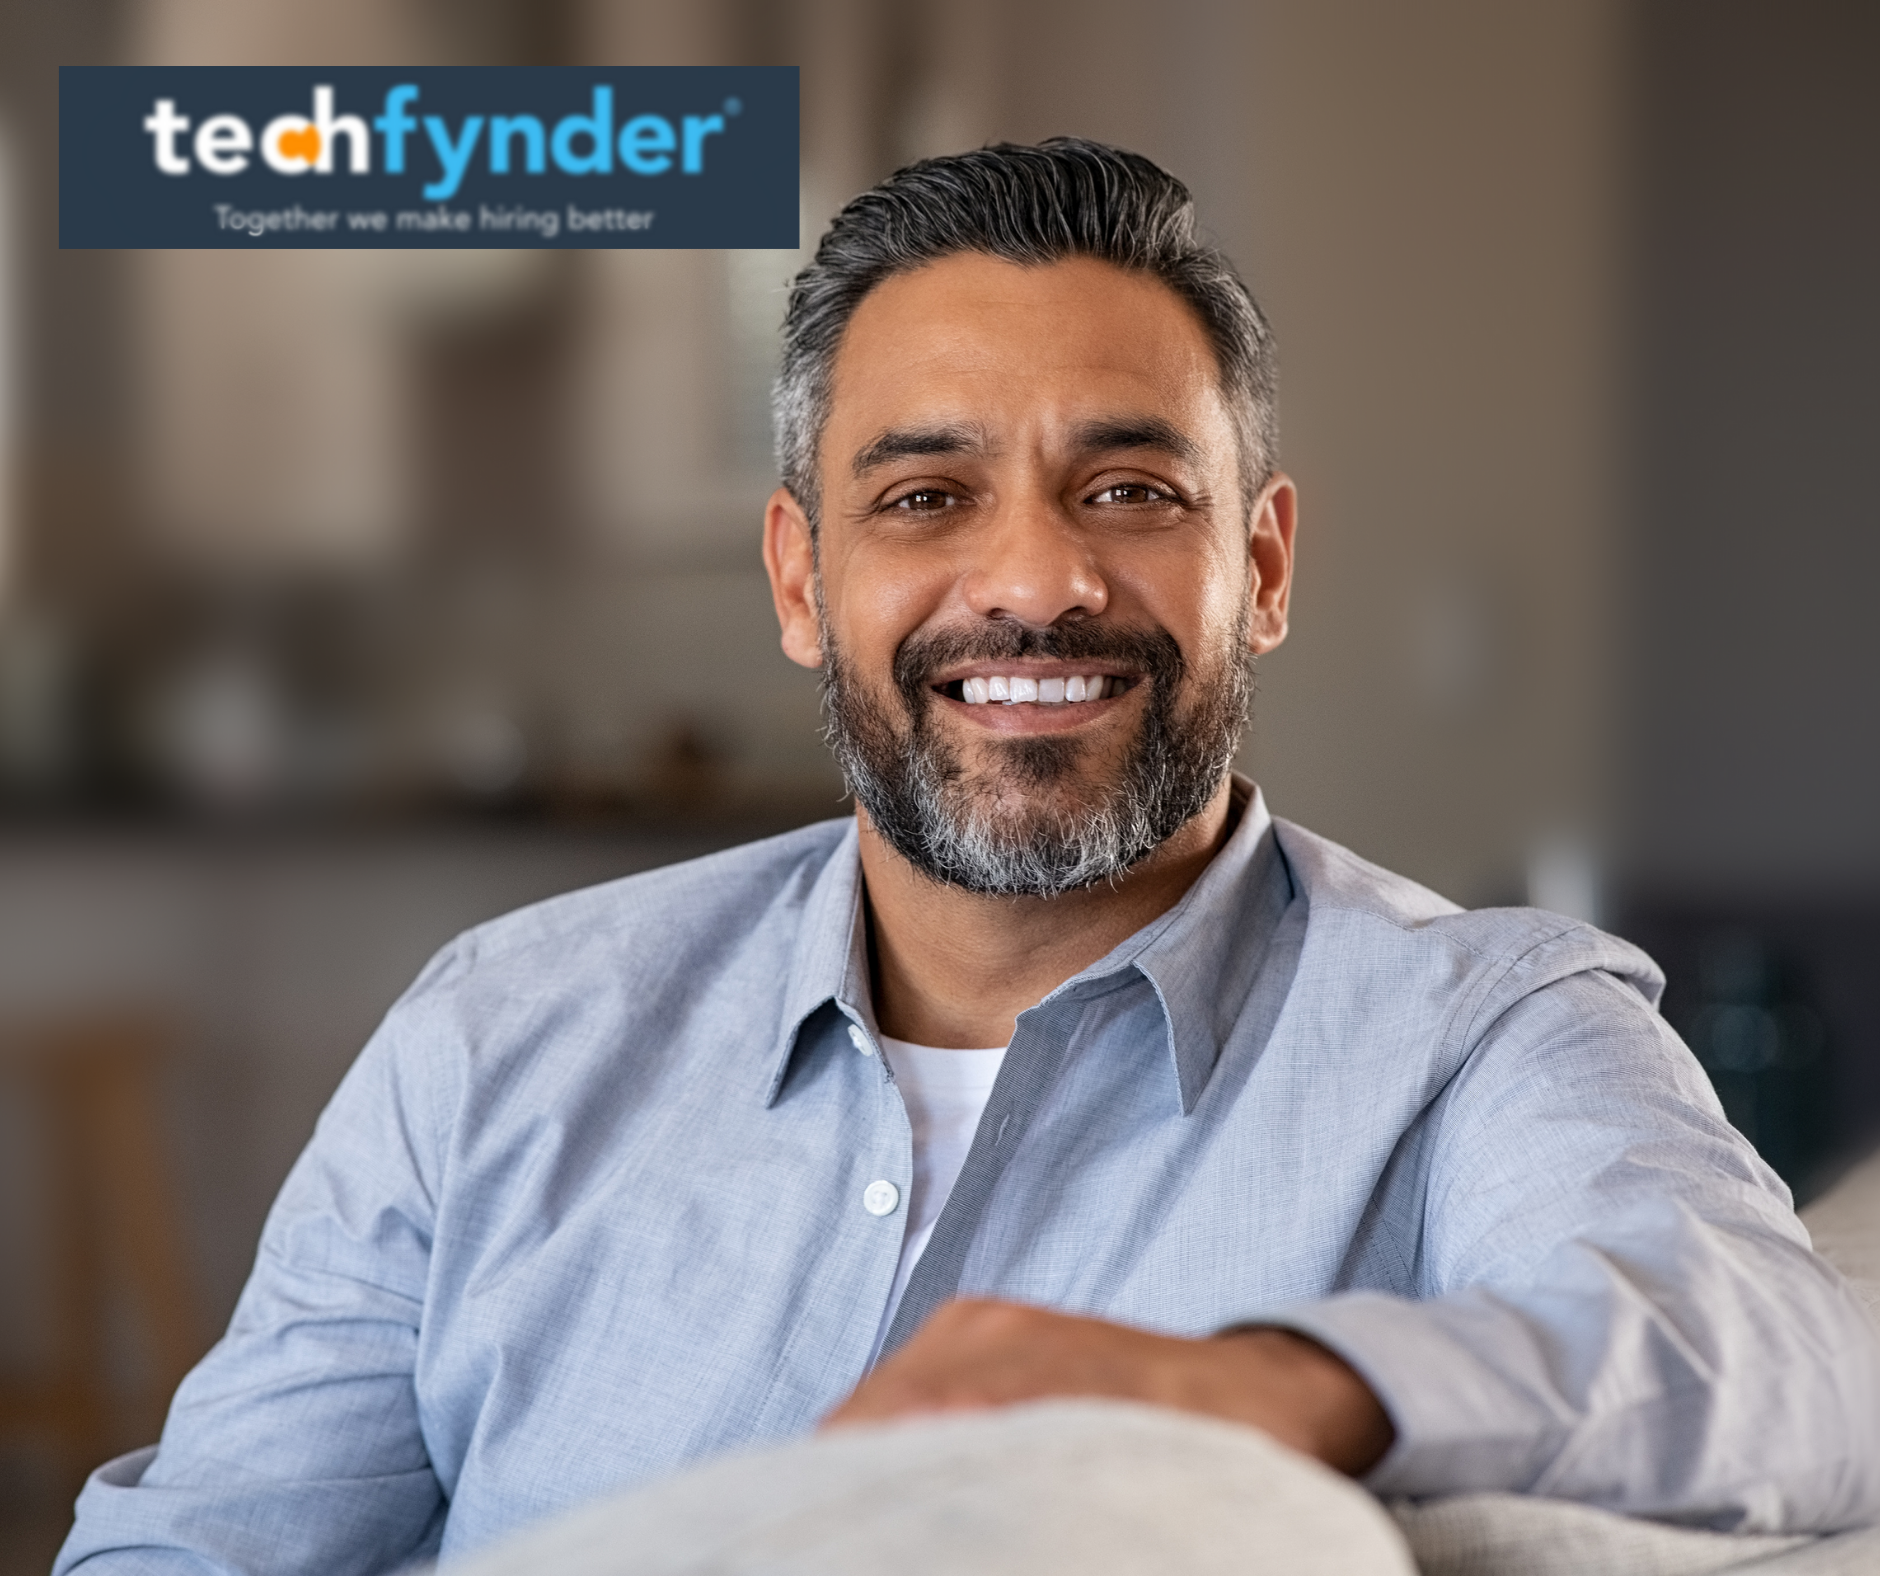 Techfynder-find jobs this new year